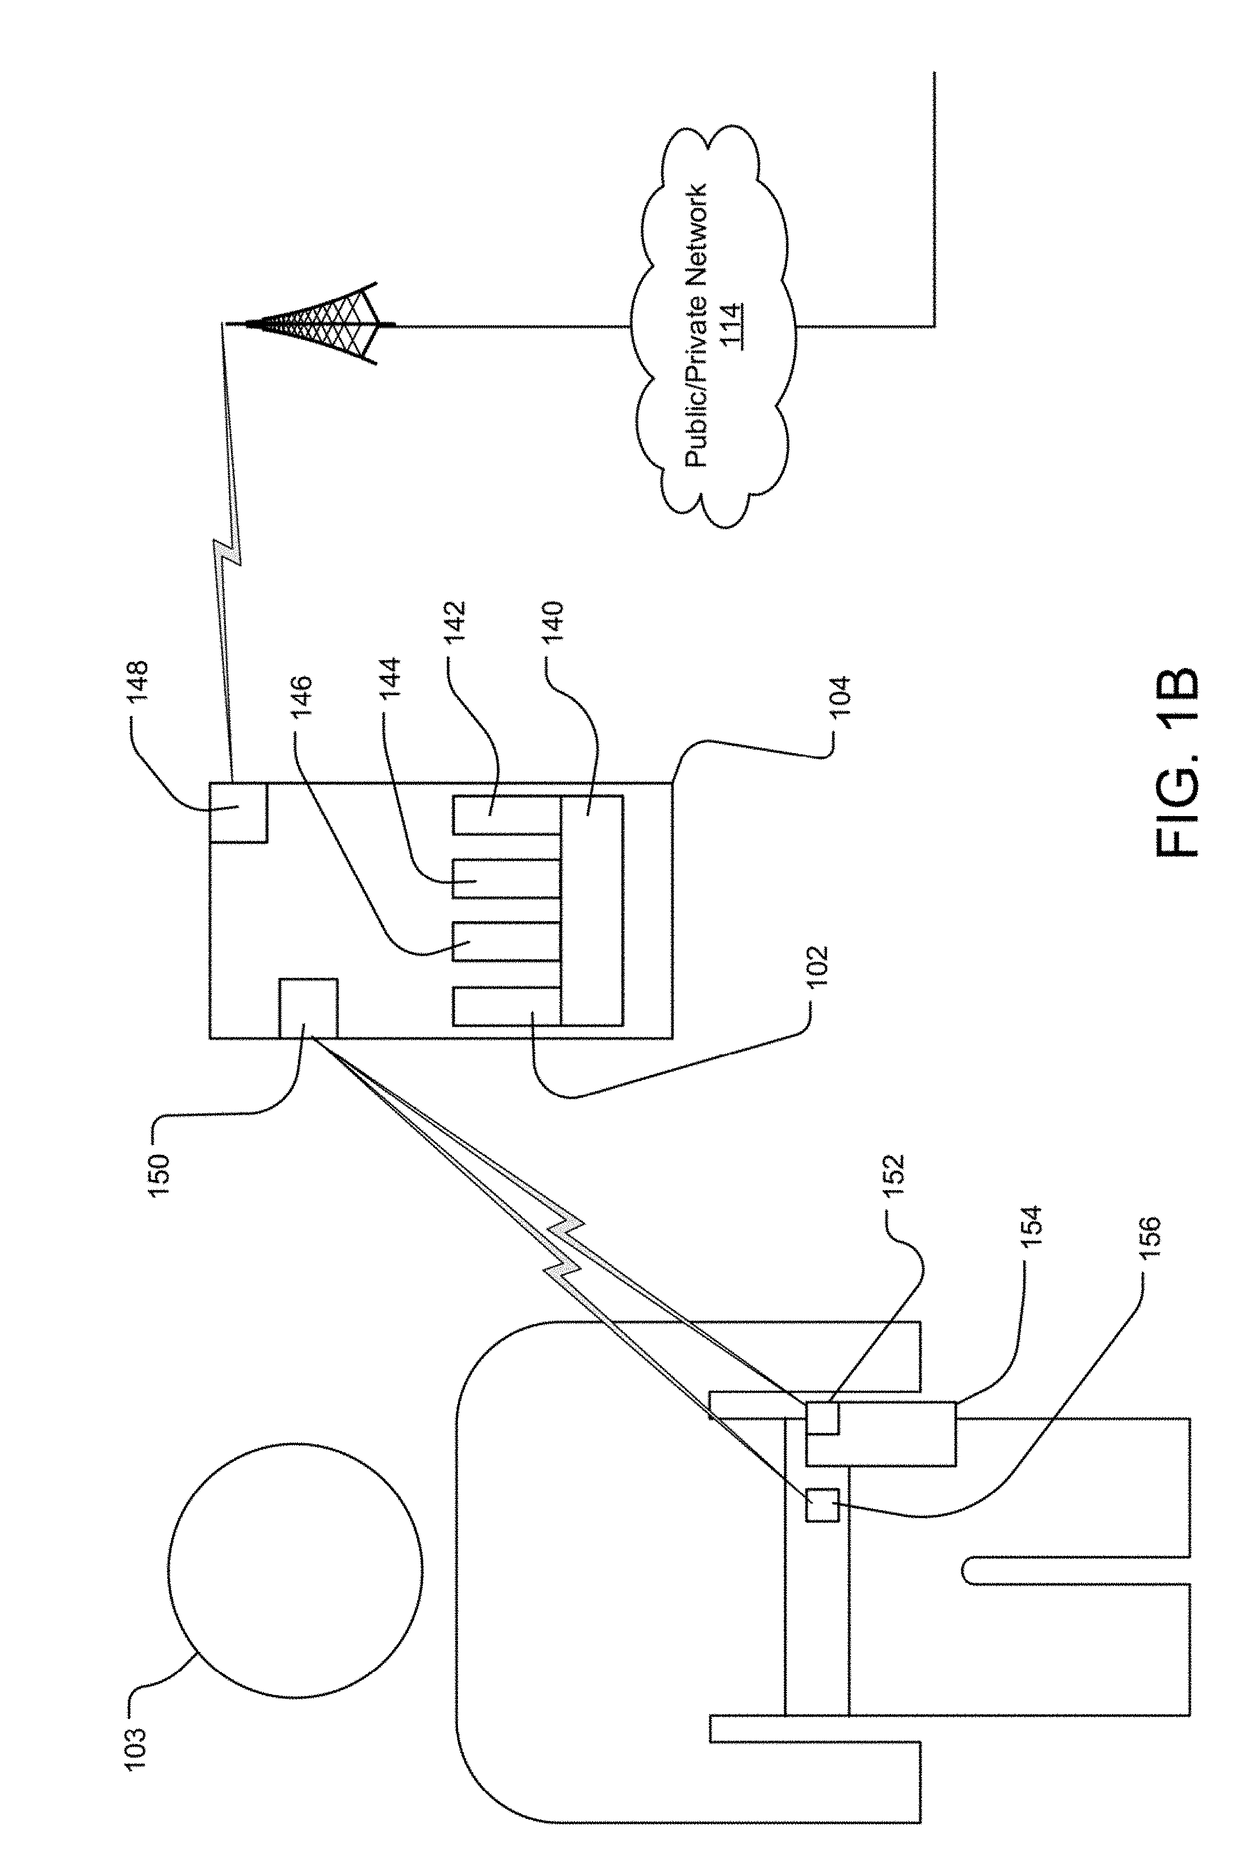 Method and system for mobile duress alarm